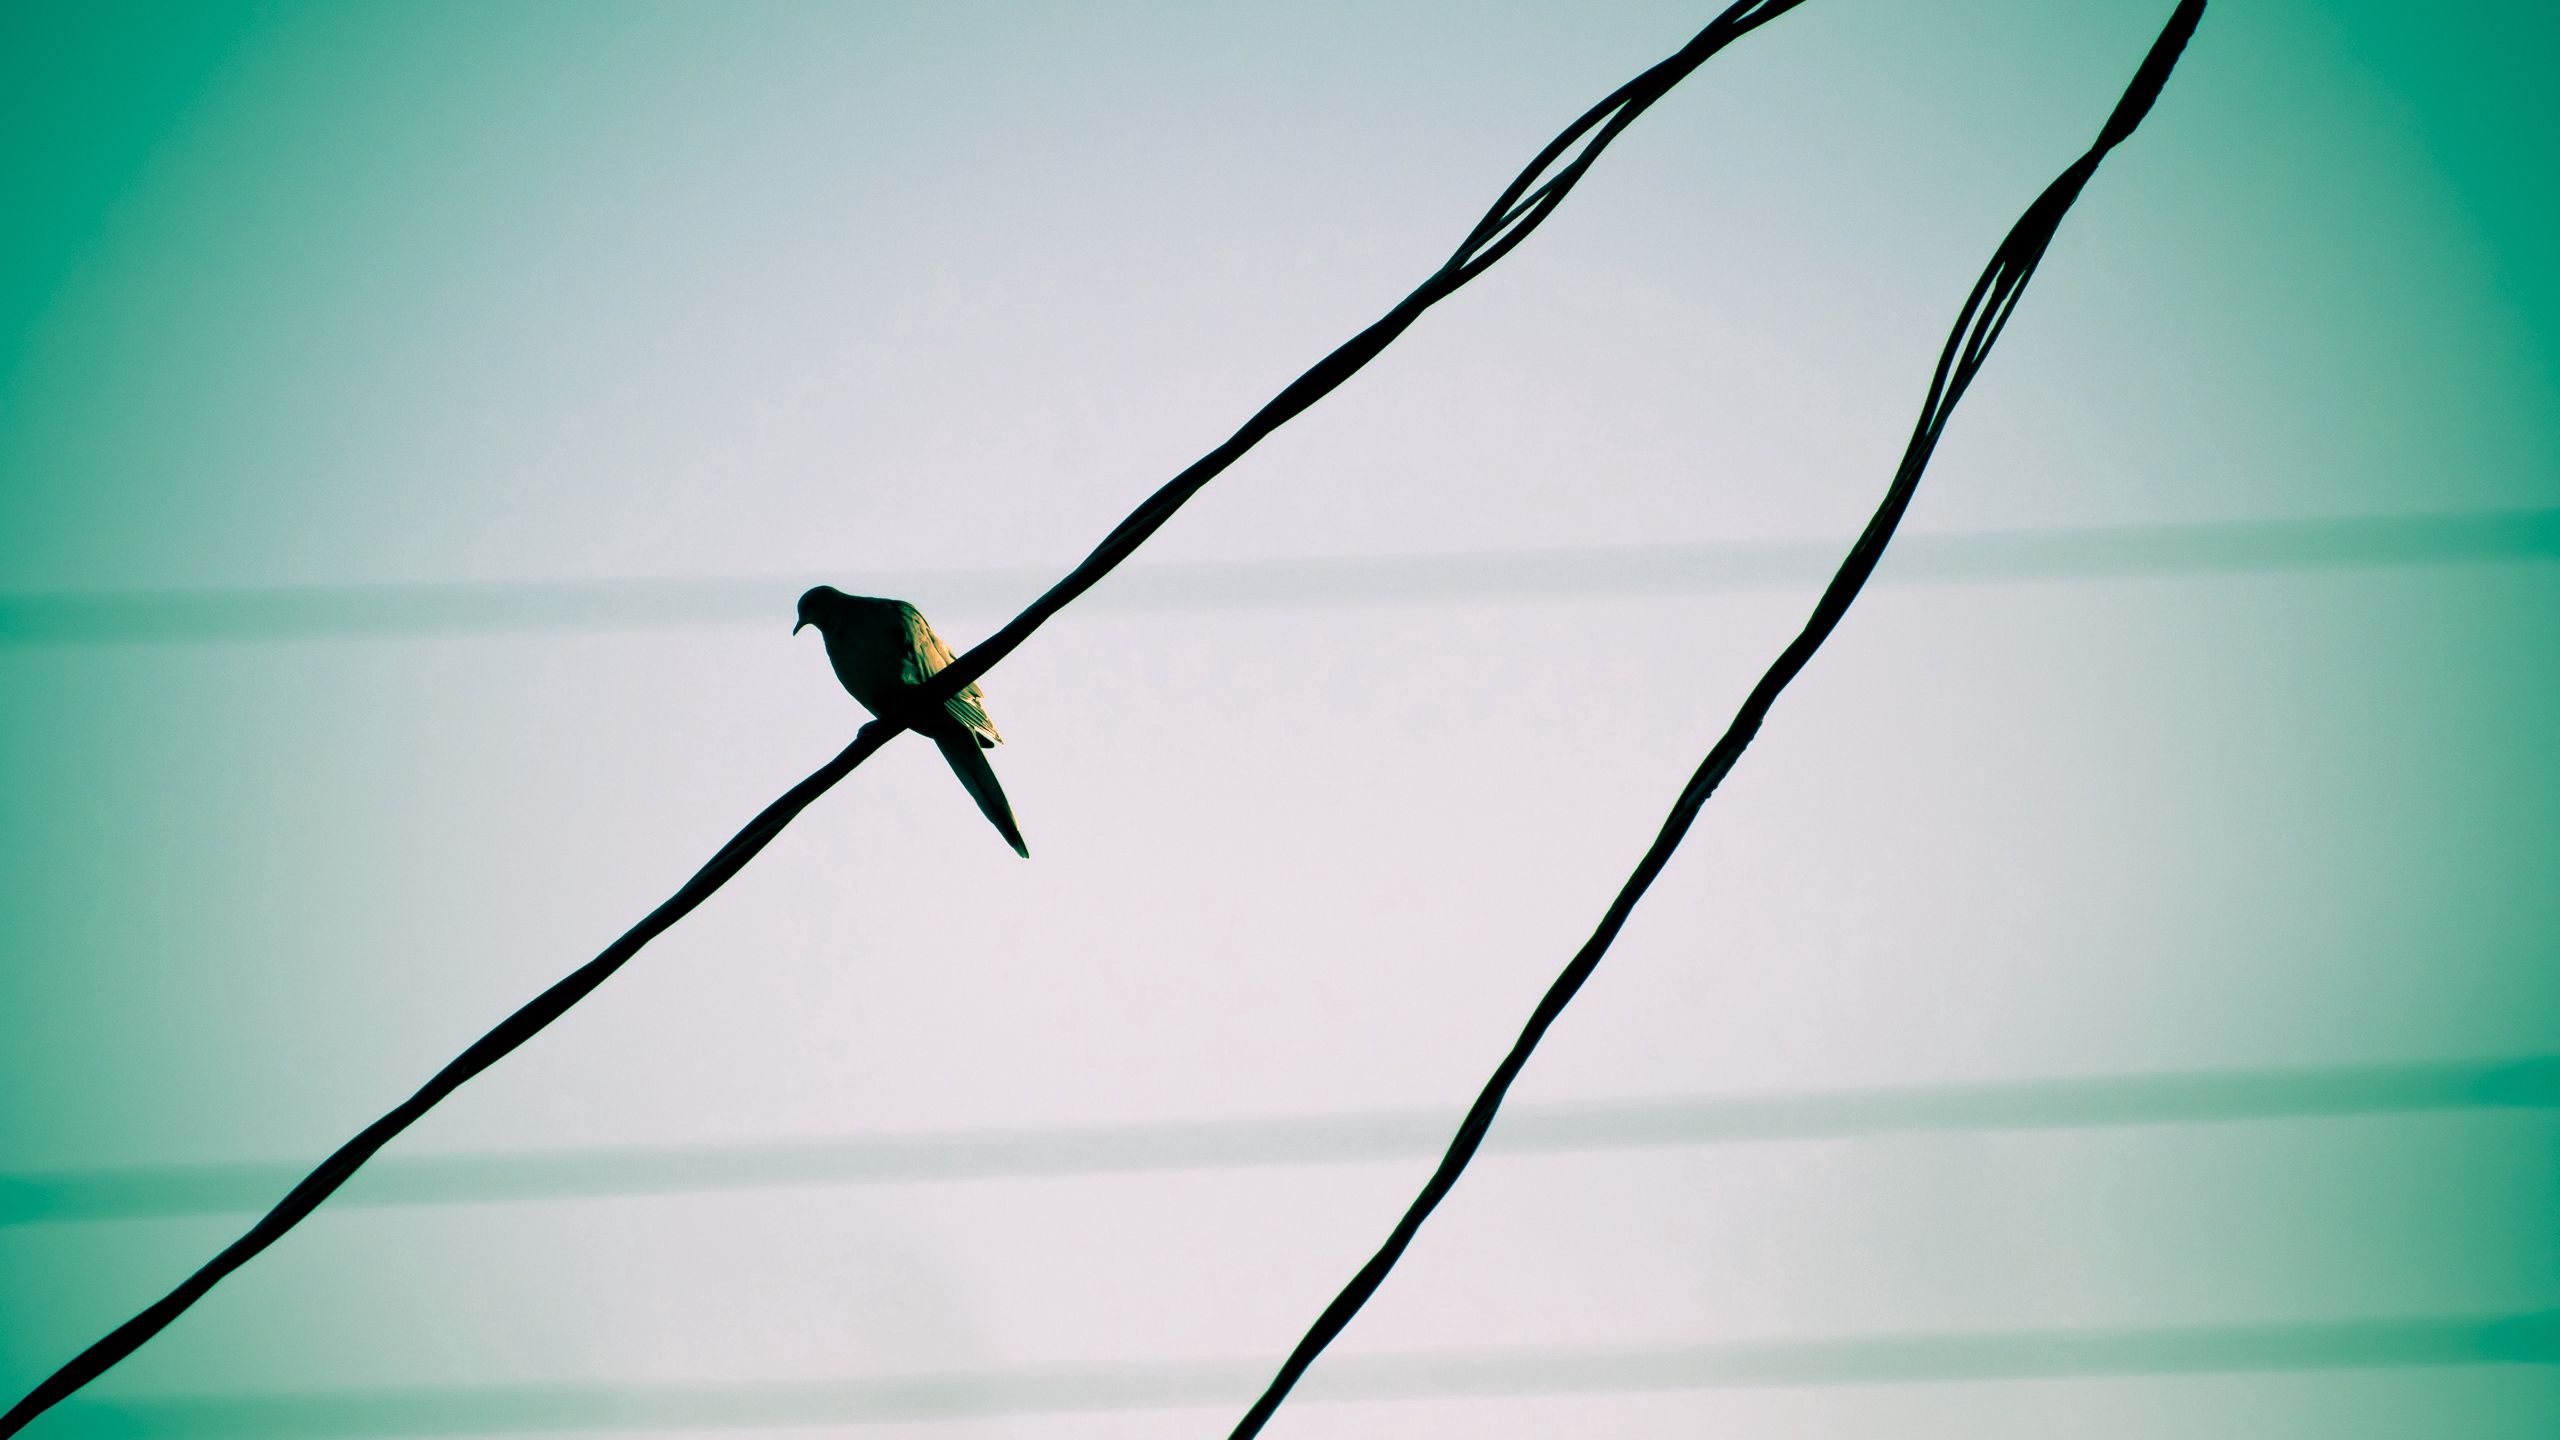 animals, sky, bird, wires, wire, expectation, waiting